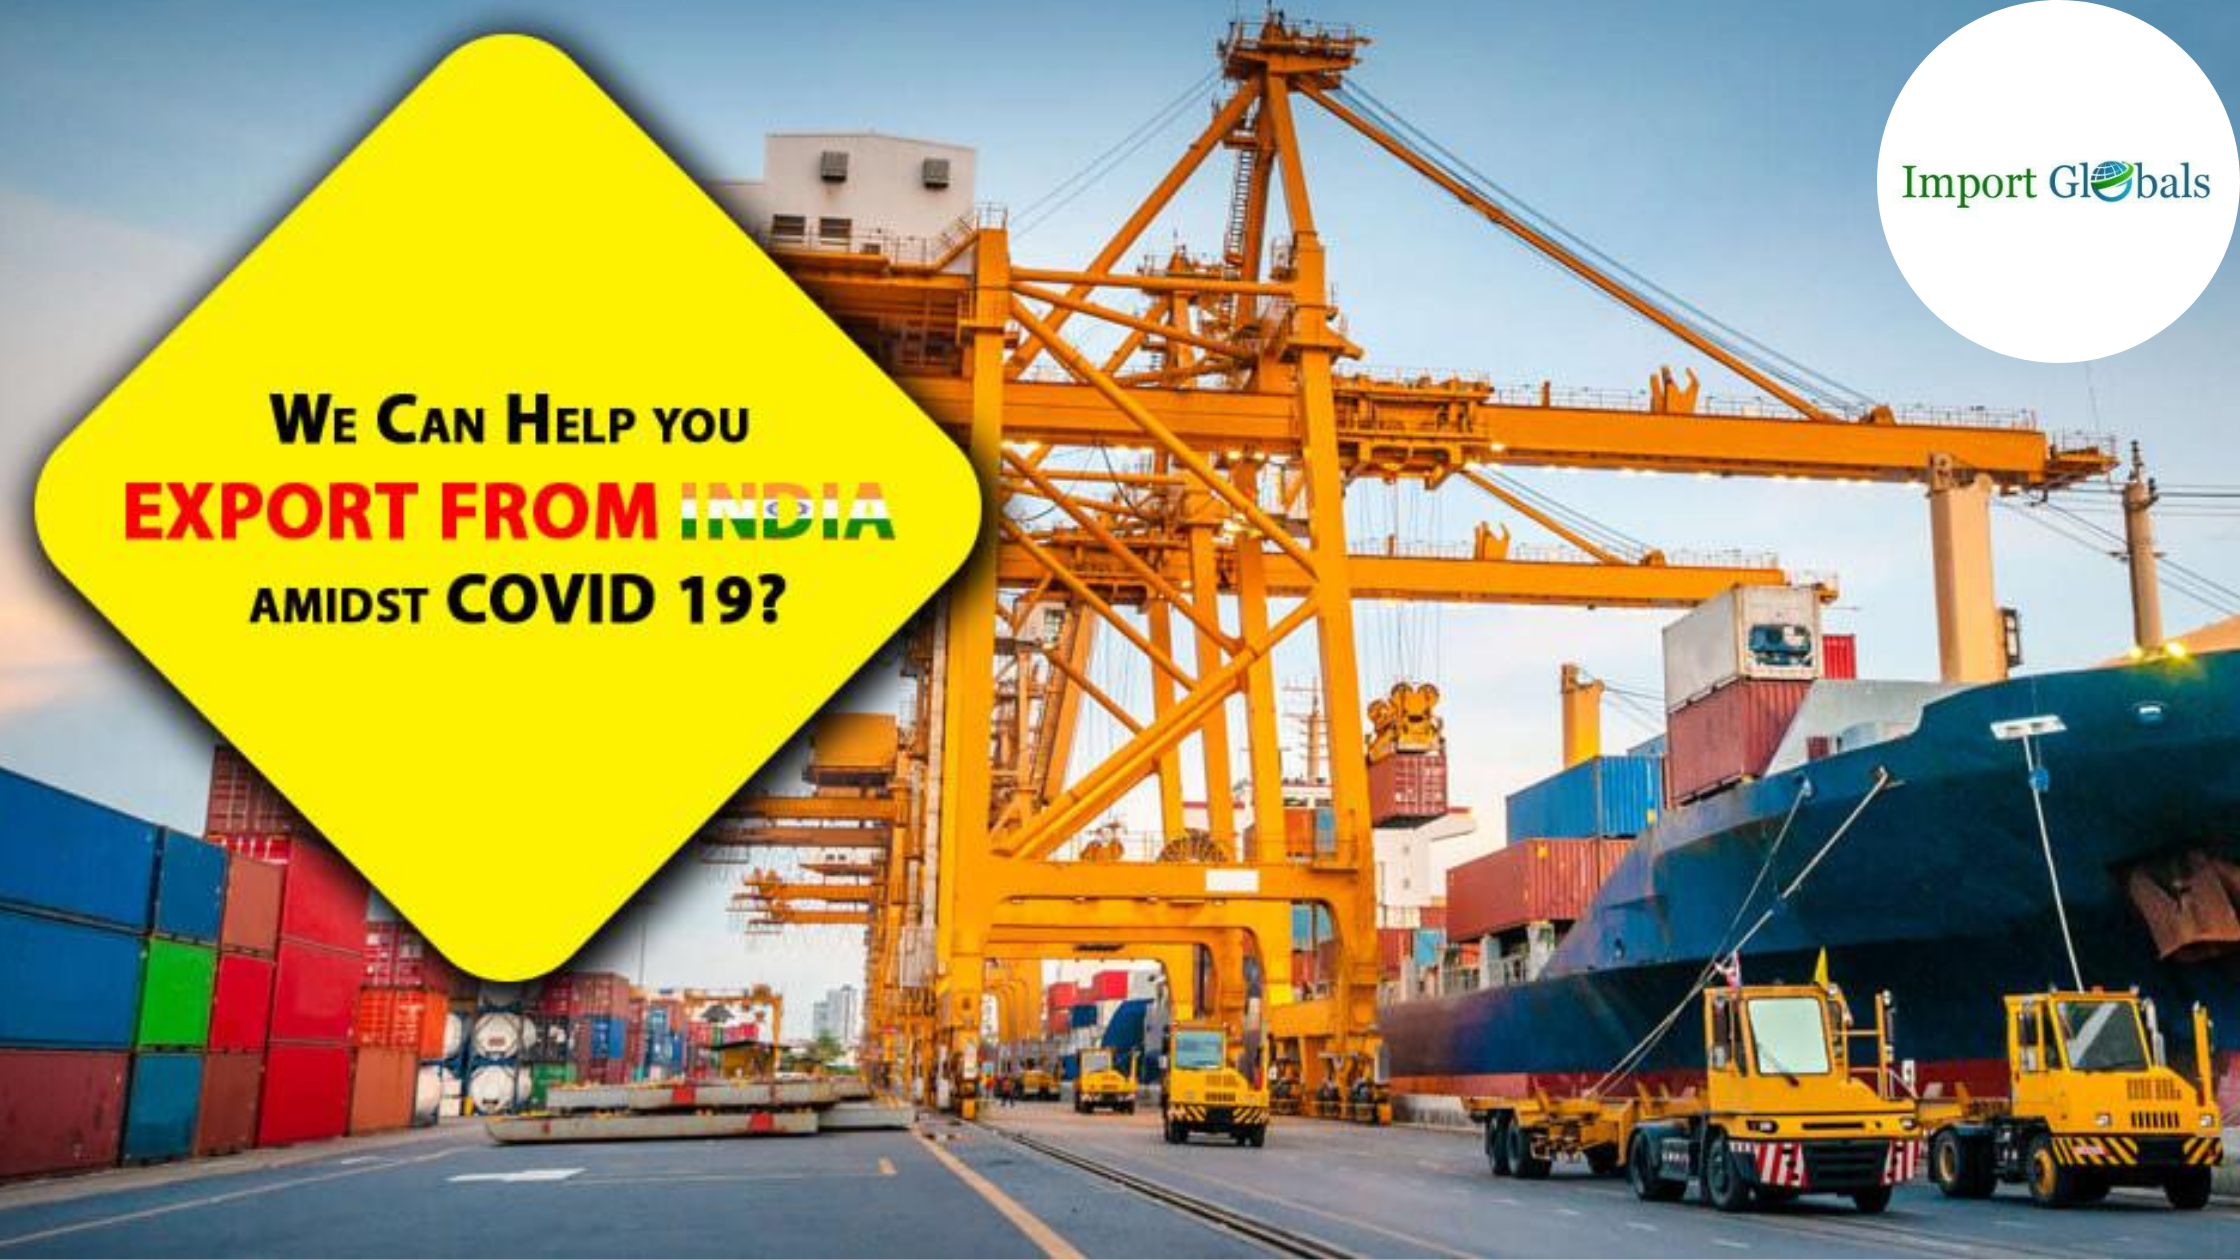 We Can Help You Export from India Amidst Covid-19